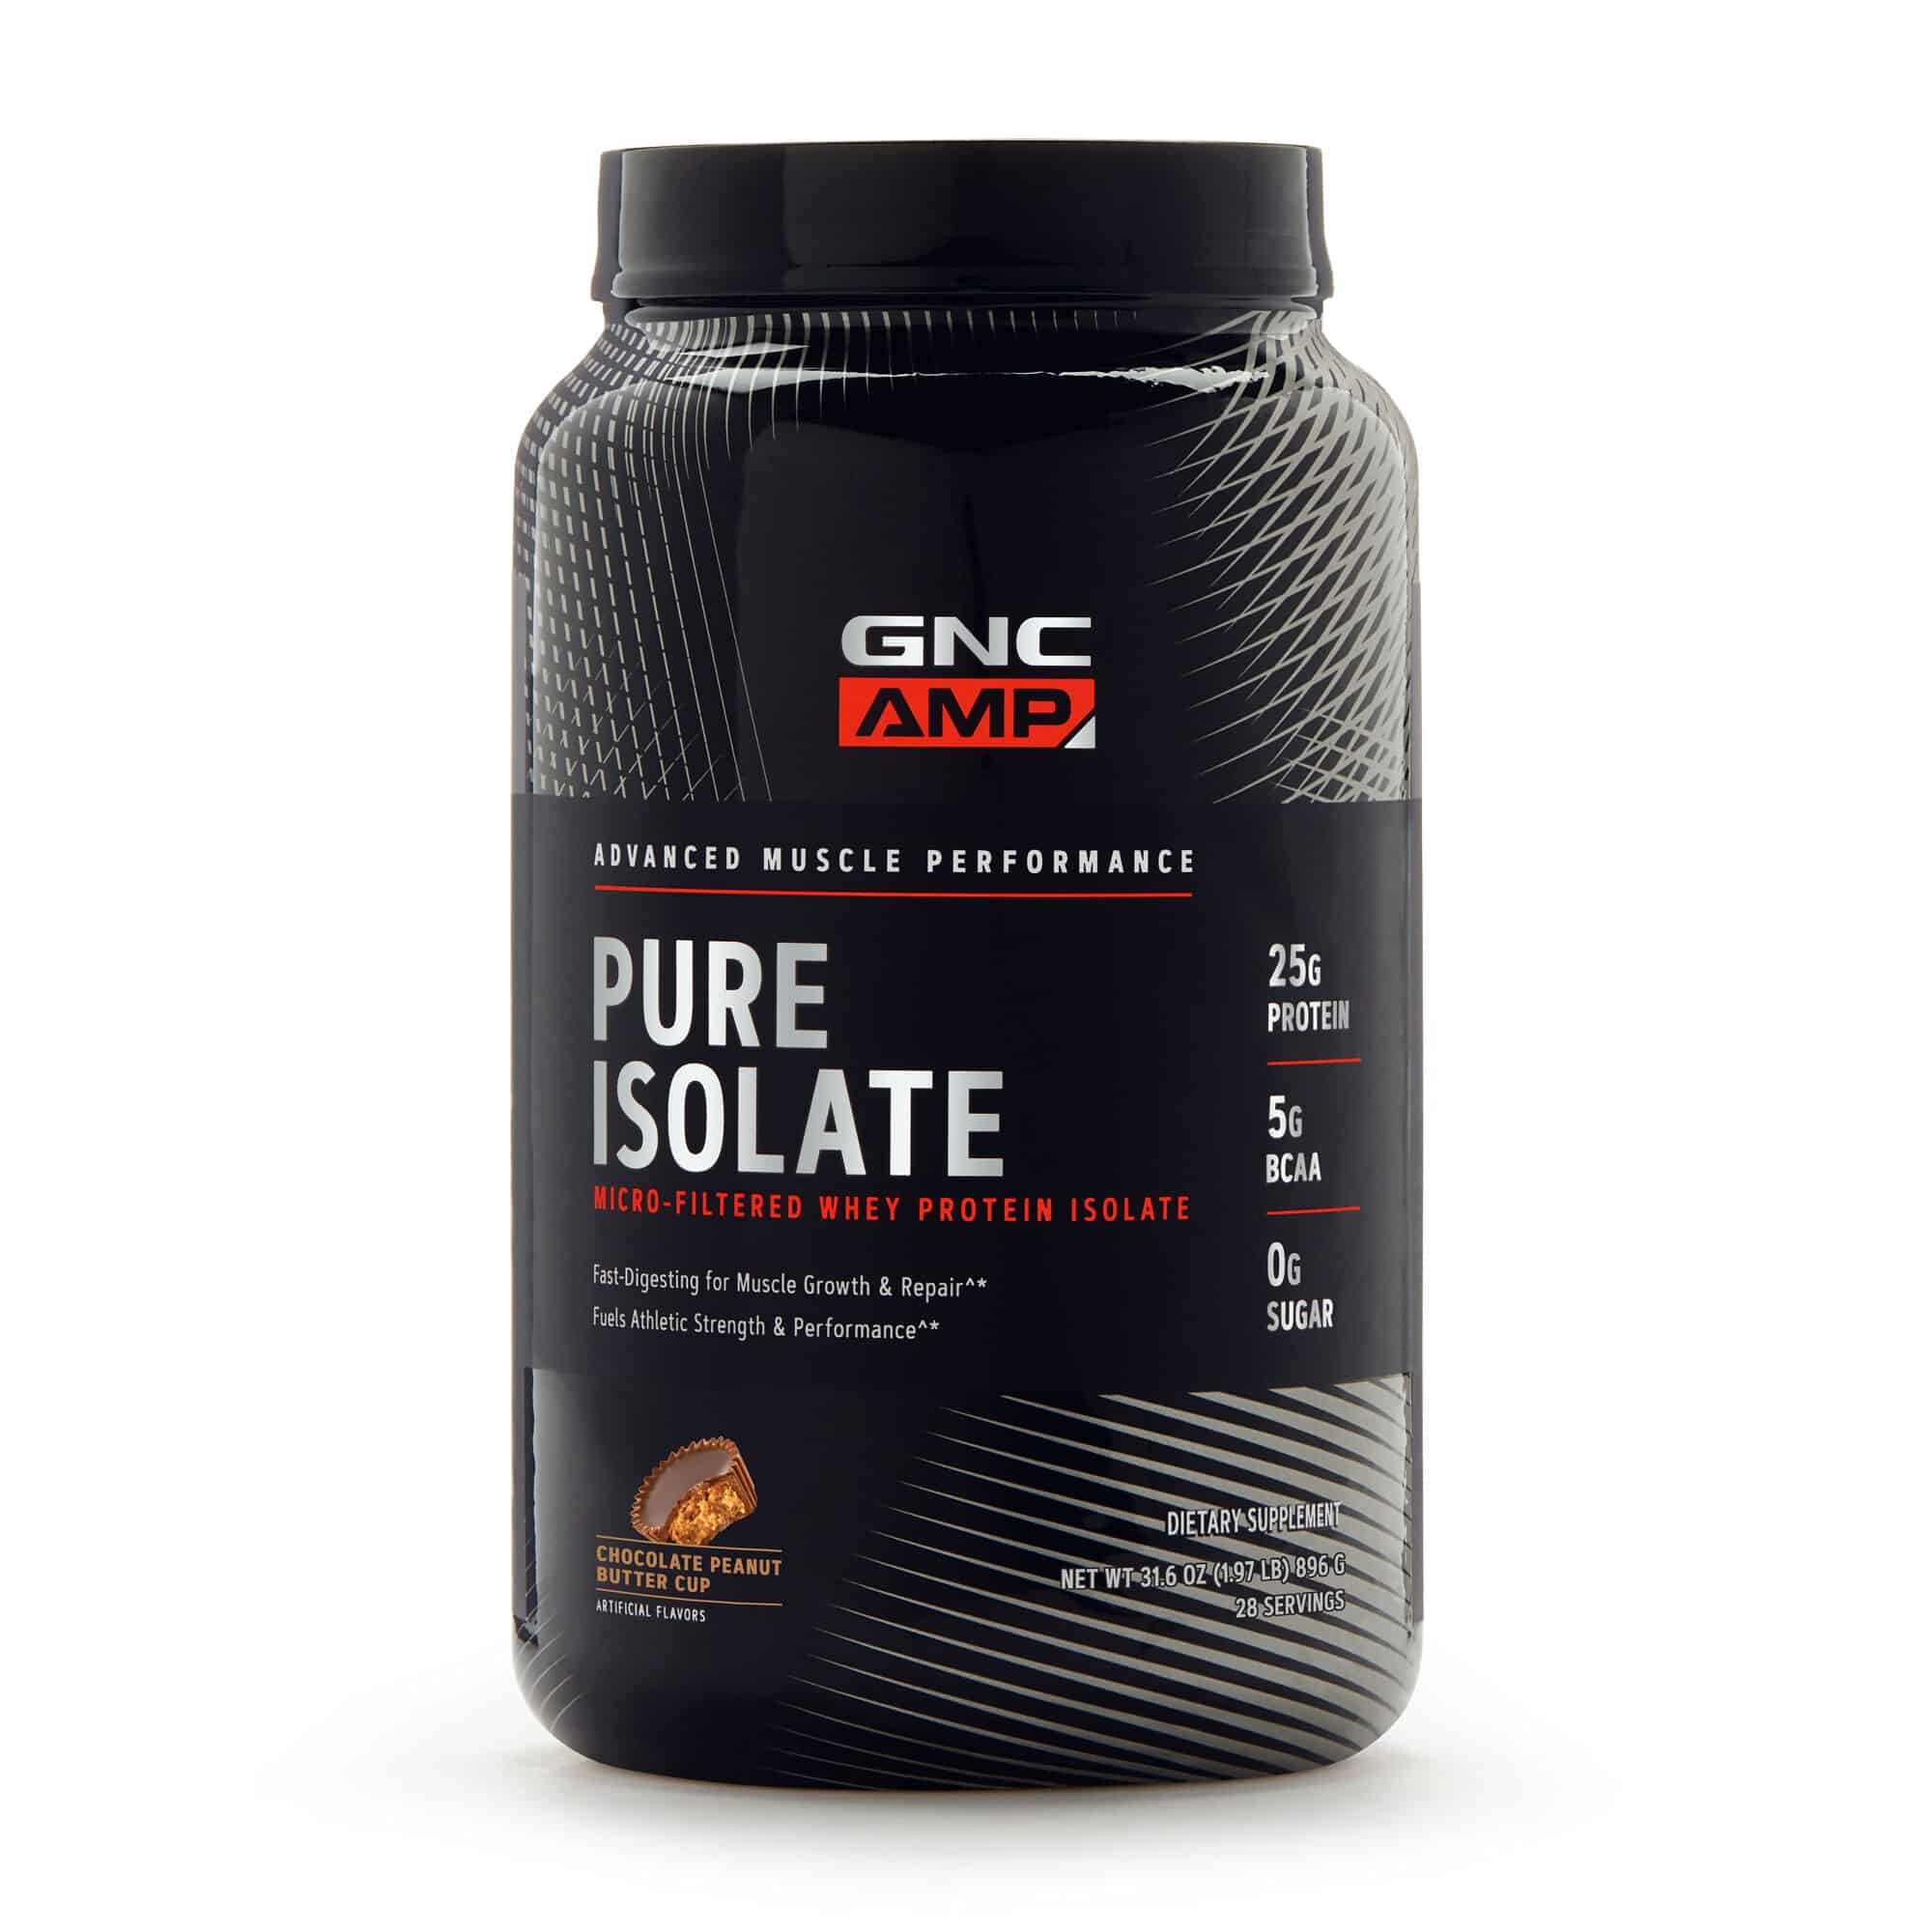 GNC AMP Pure Whey Isolate Protein